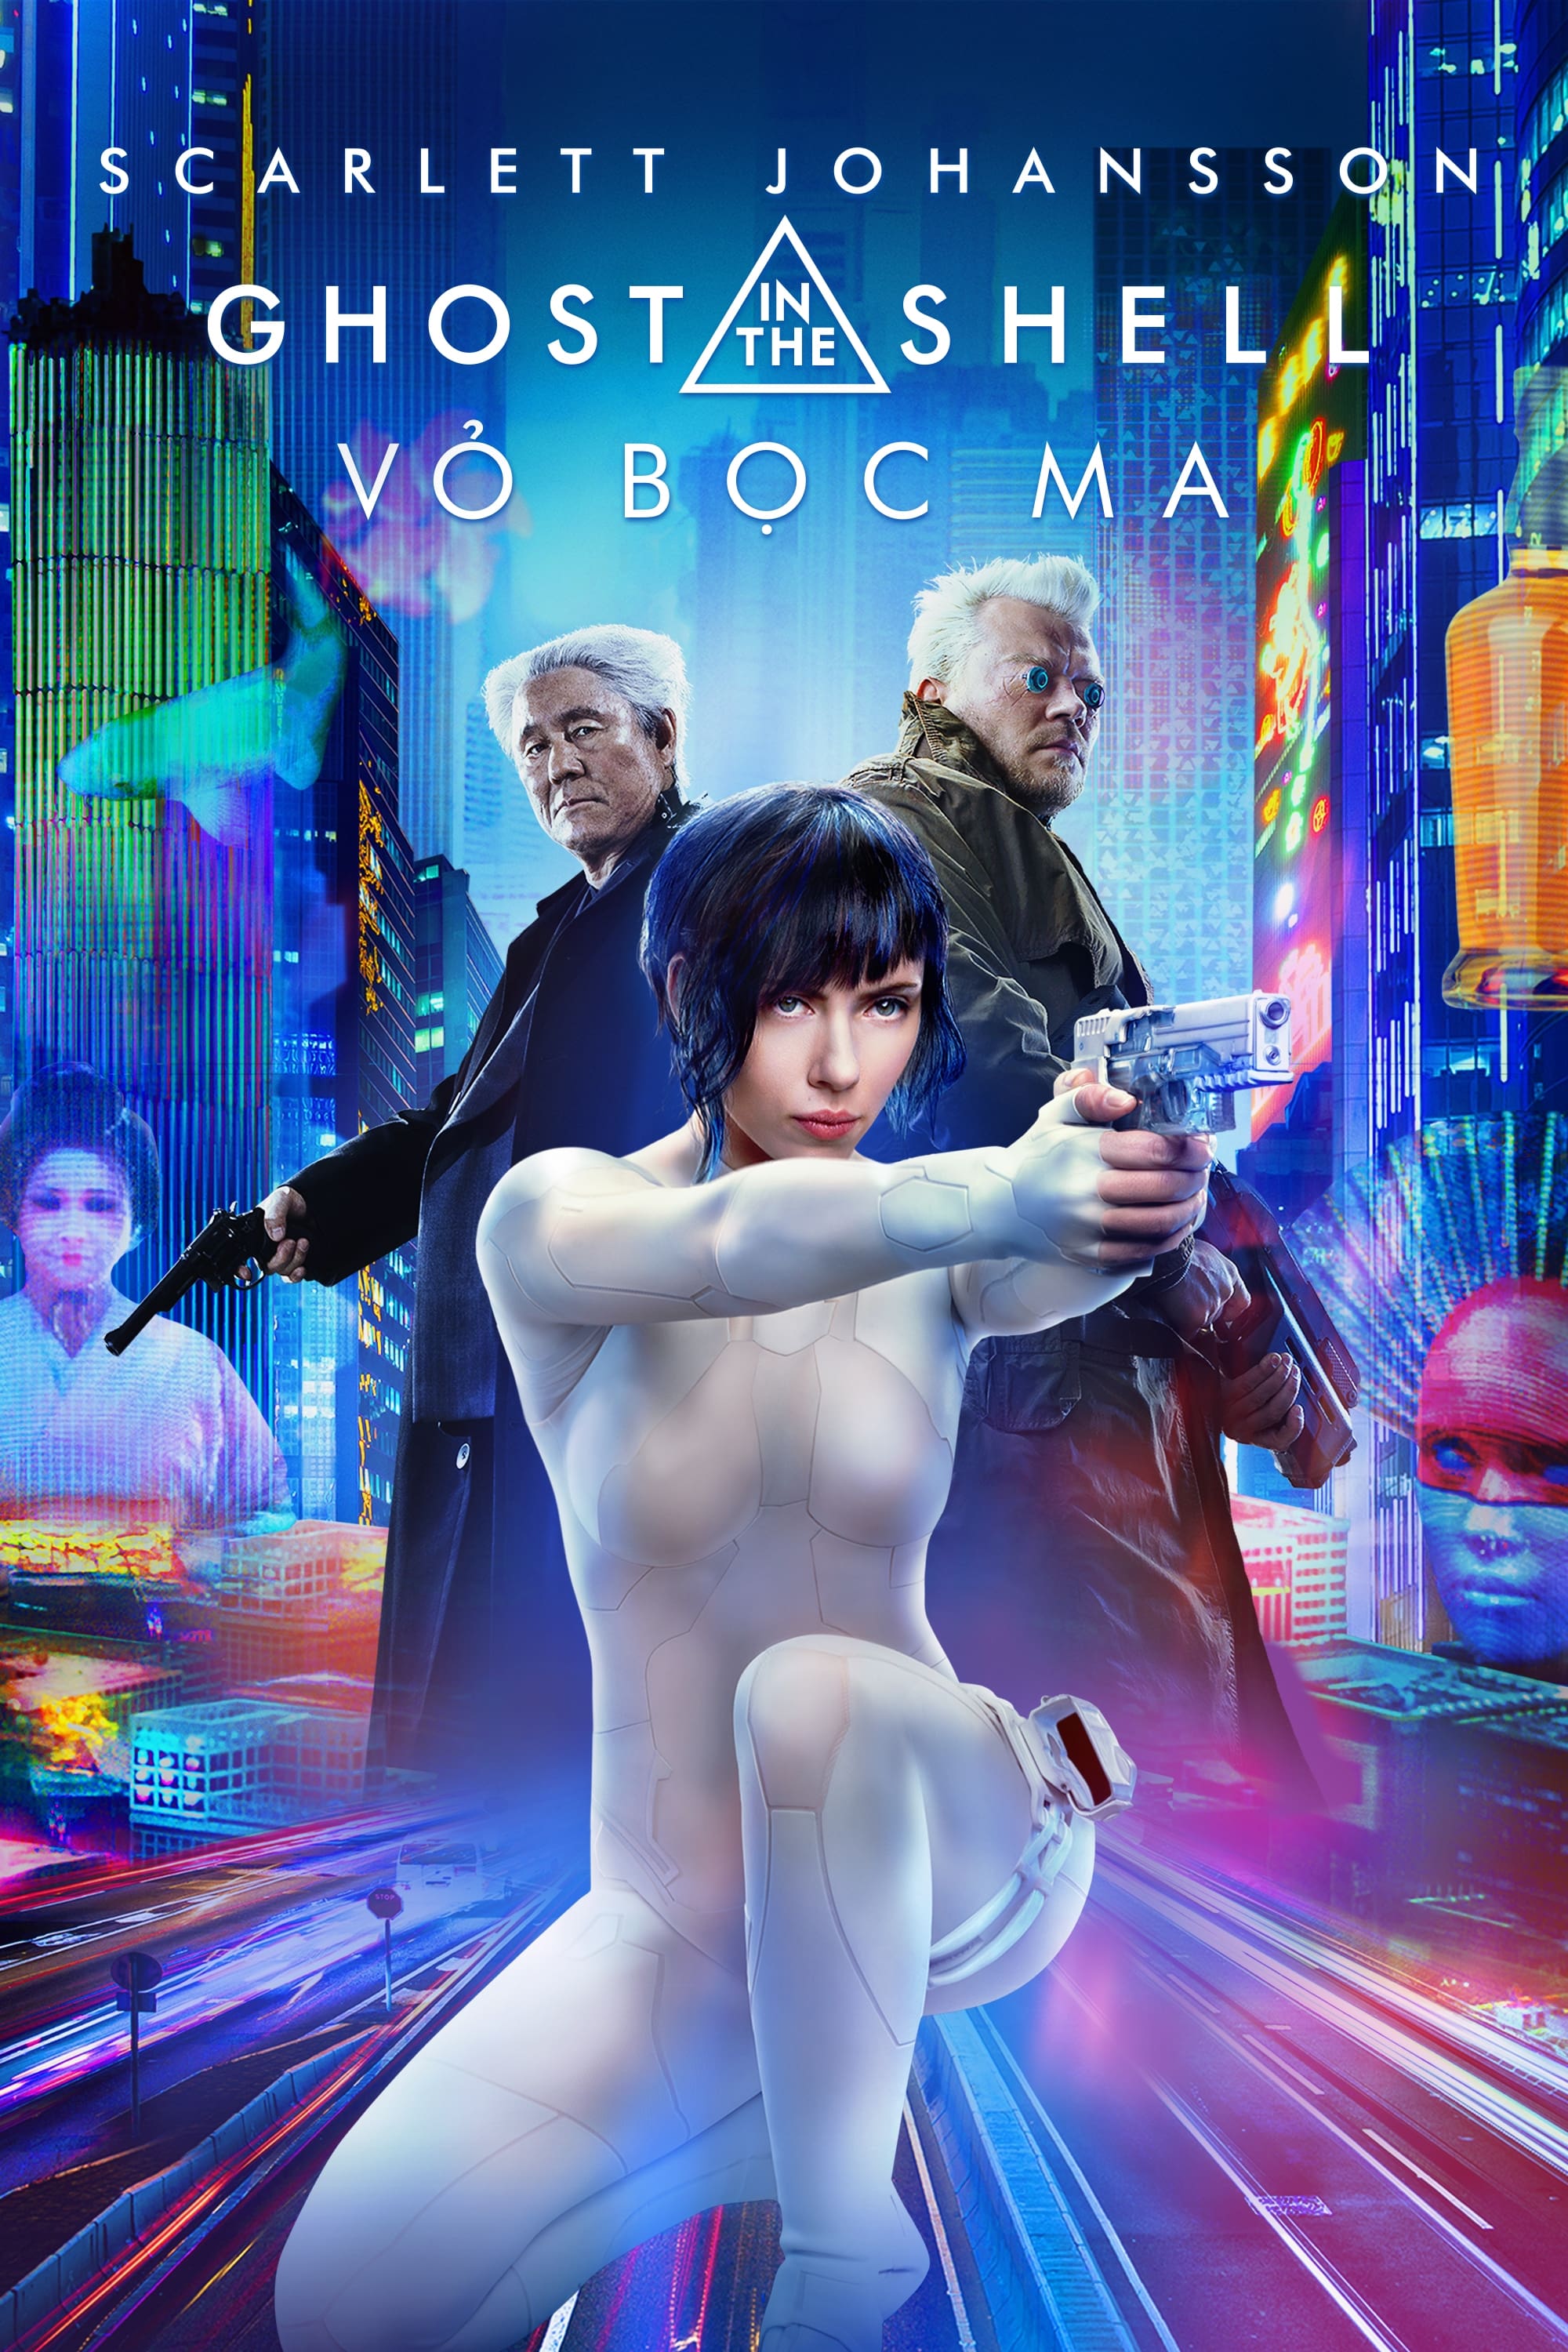 Vỏ Bọc Ma (Ghost in the Shell) [2017]